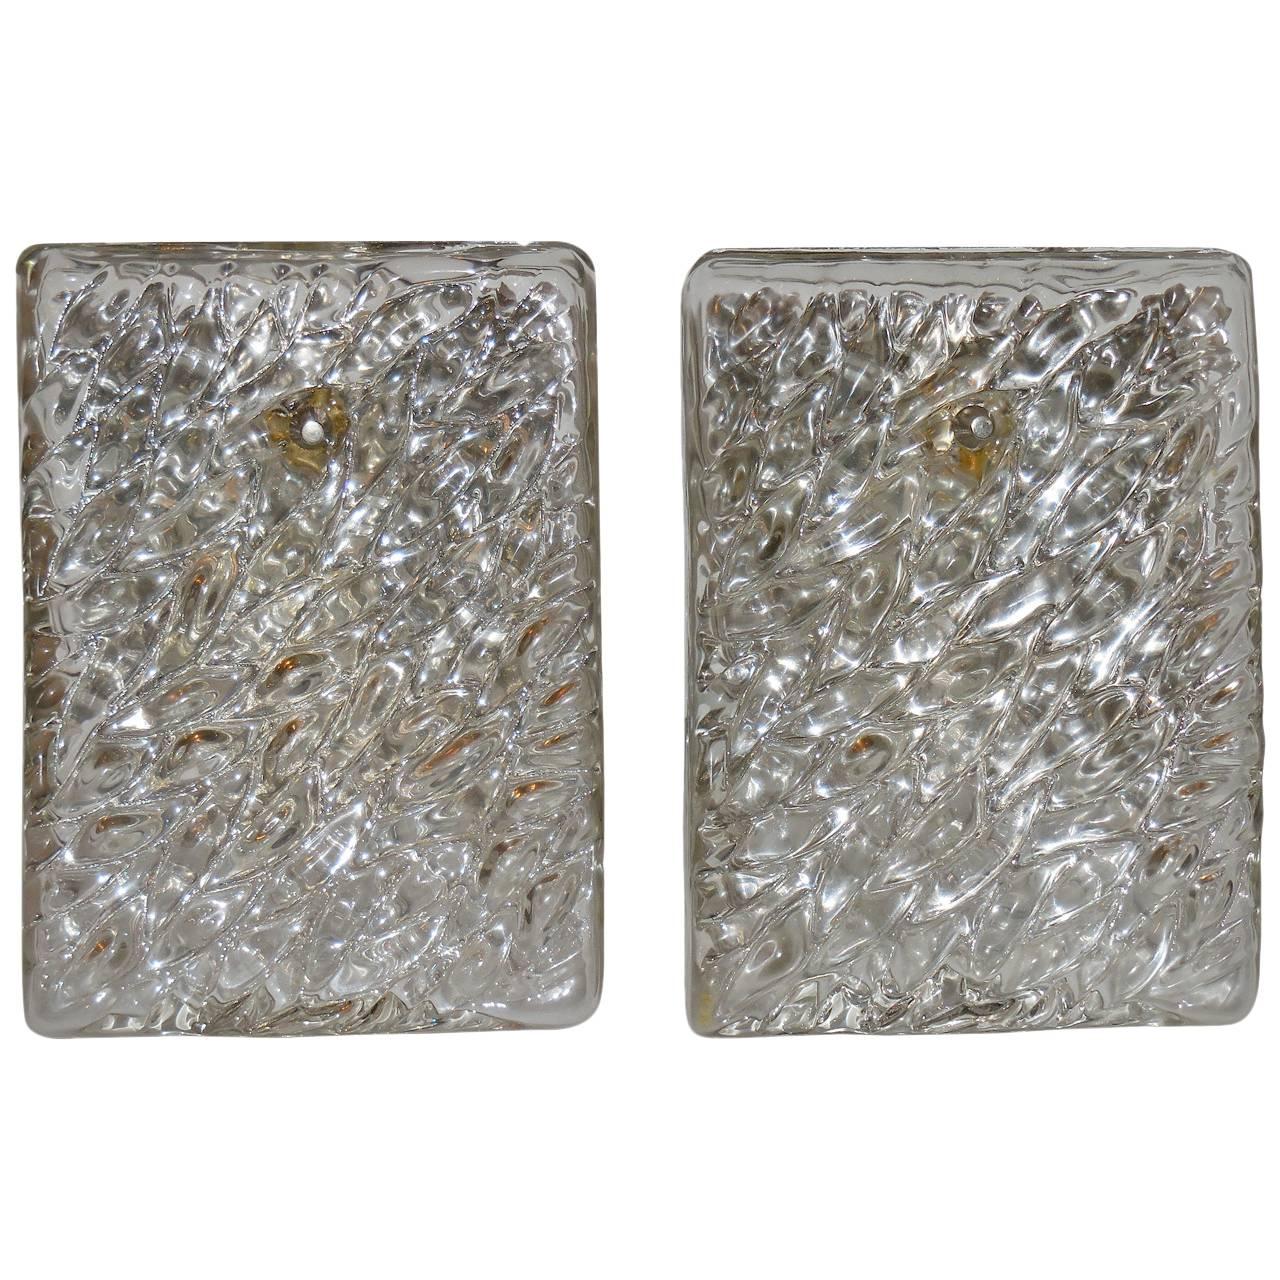 Pair of Cubist Glass Wall Sconces